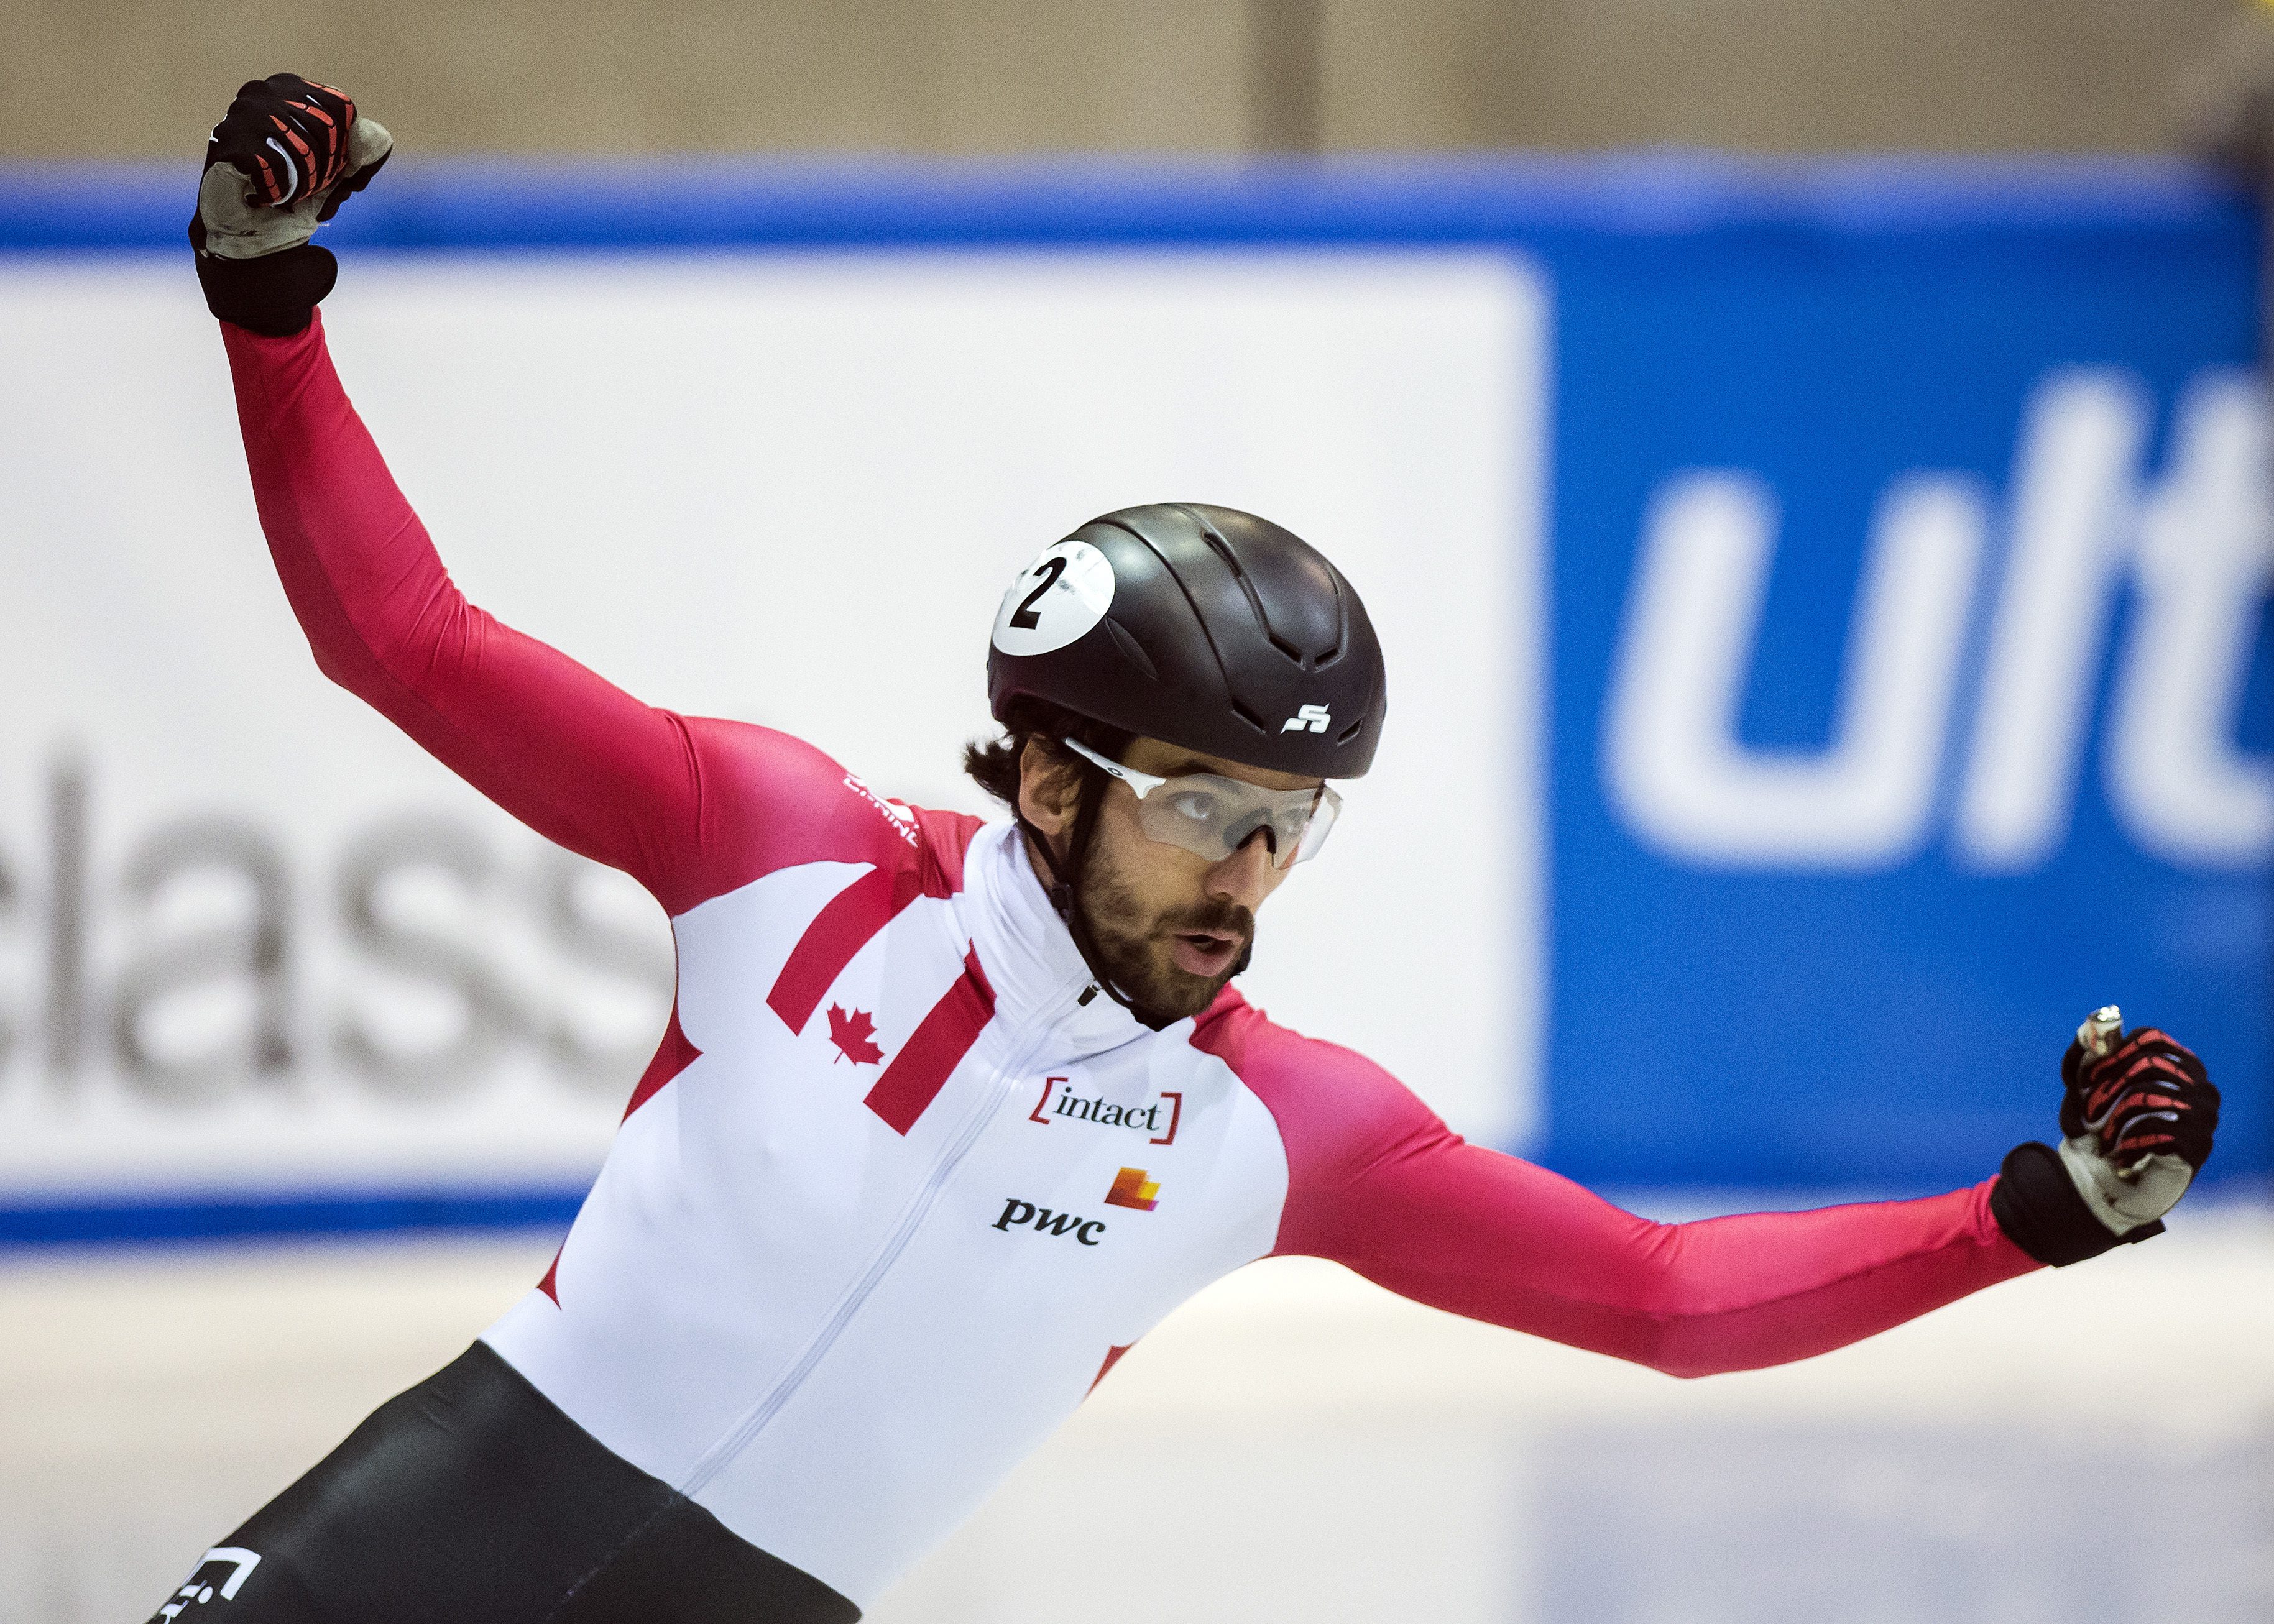 Winner Charles Hamelin of Canada celebrates winning the men's 1500m at the short track speed skating World Cup in Dresden, Germany, Saturday, Feb. 4, 2017. (AP Photo/Jens Meyer)